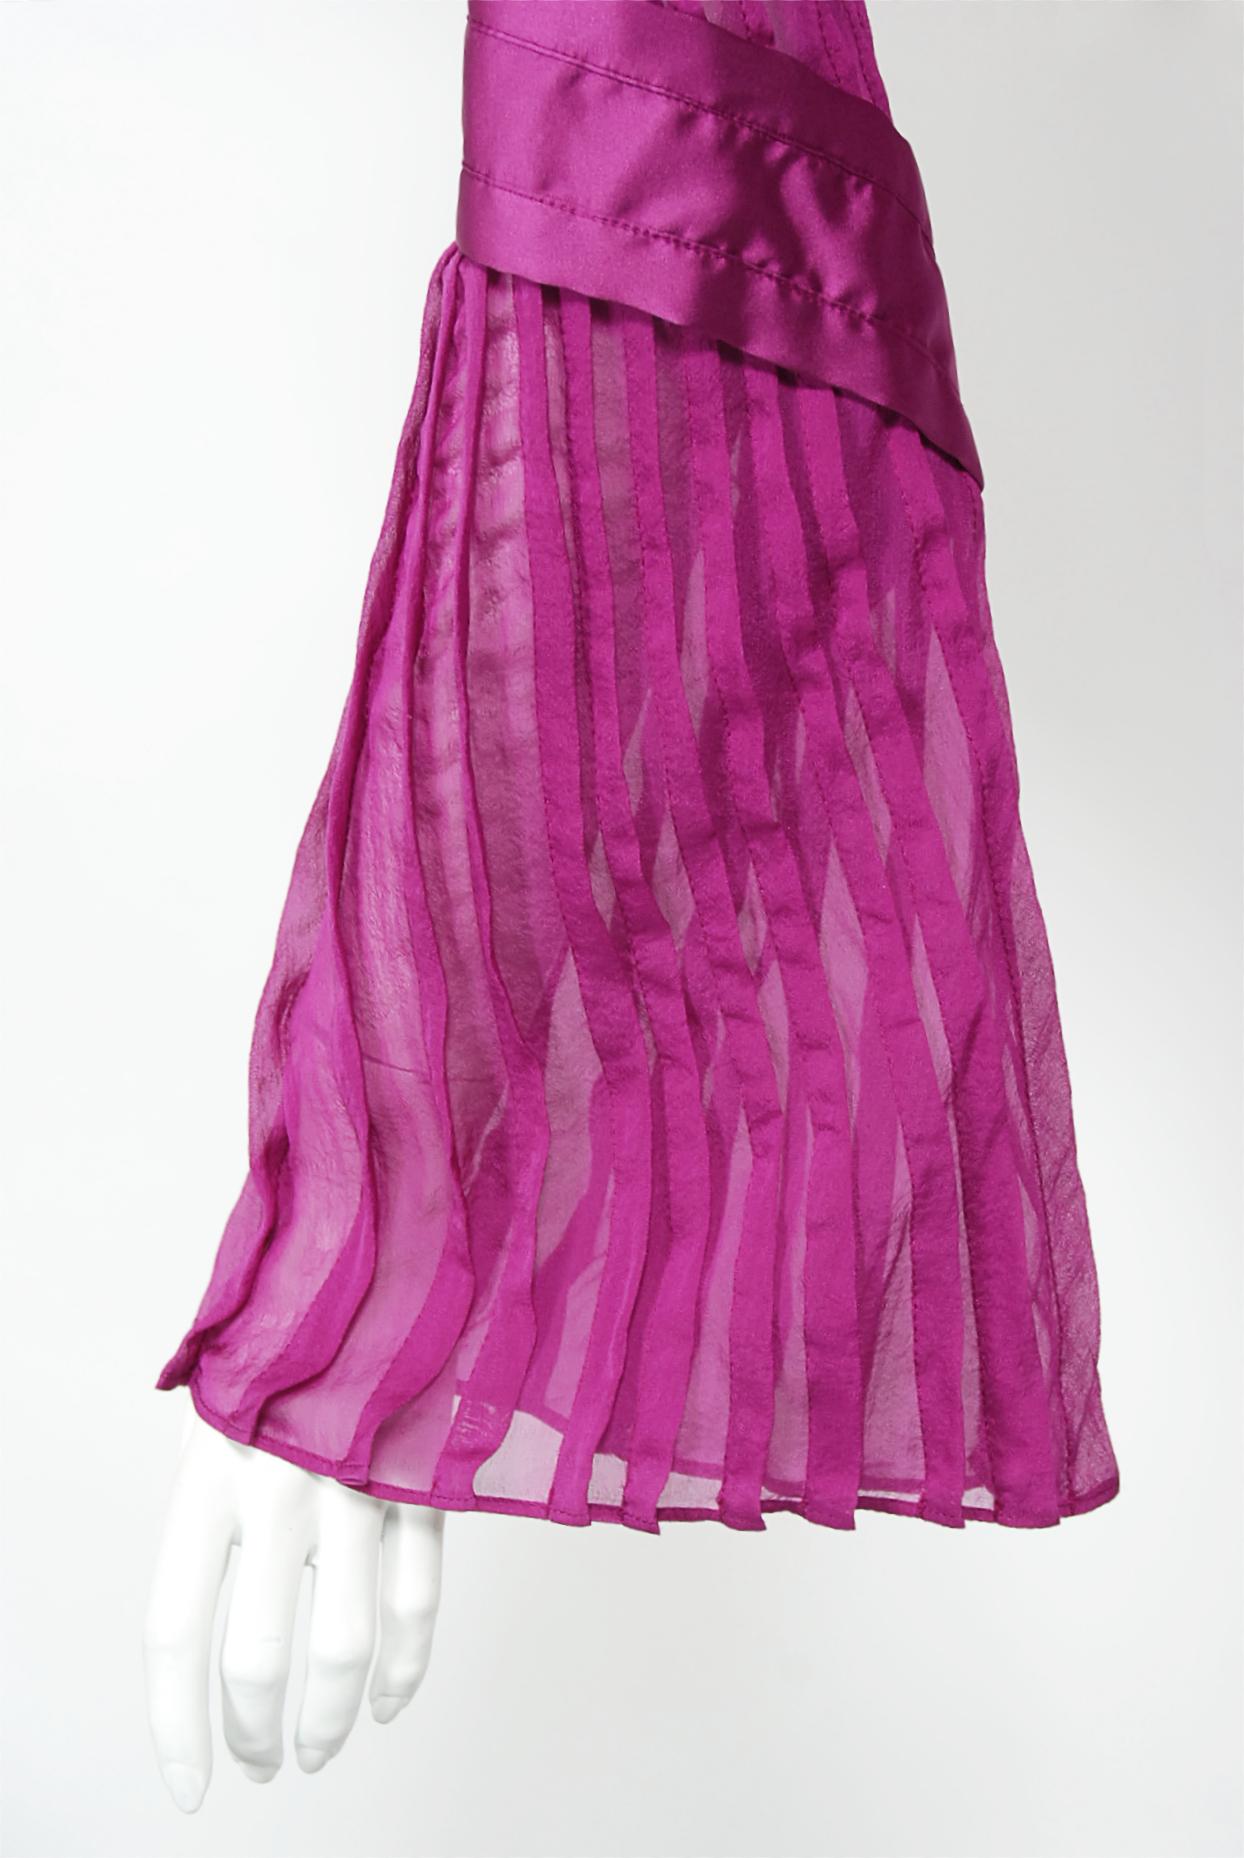 2004 Gucci by Tom Ford Runway Pleated Purple Silk Bell Sleeve Cut-Out Dress For Sale 7